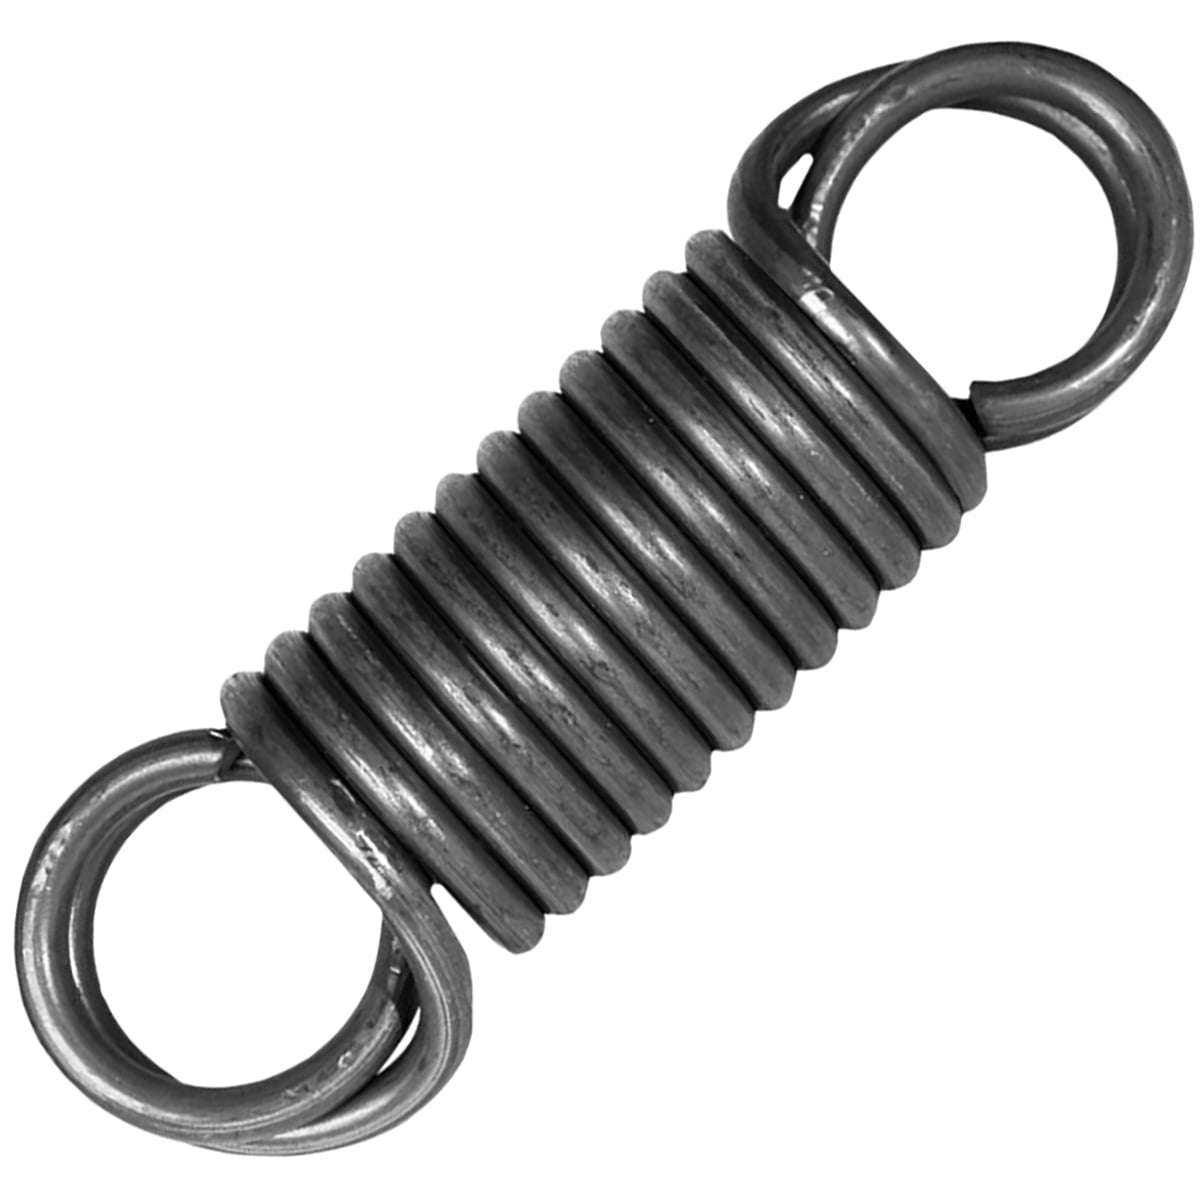 Sedroc Heavy Punching Bag Spring Coil Hanger for Heavybag Holds up to 300 lbs 